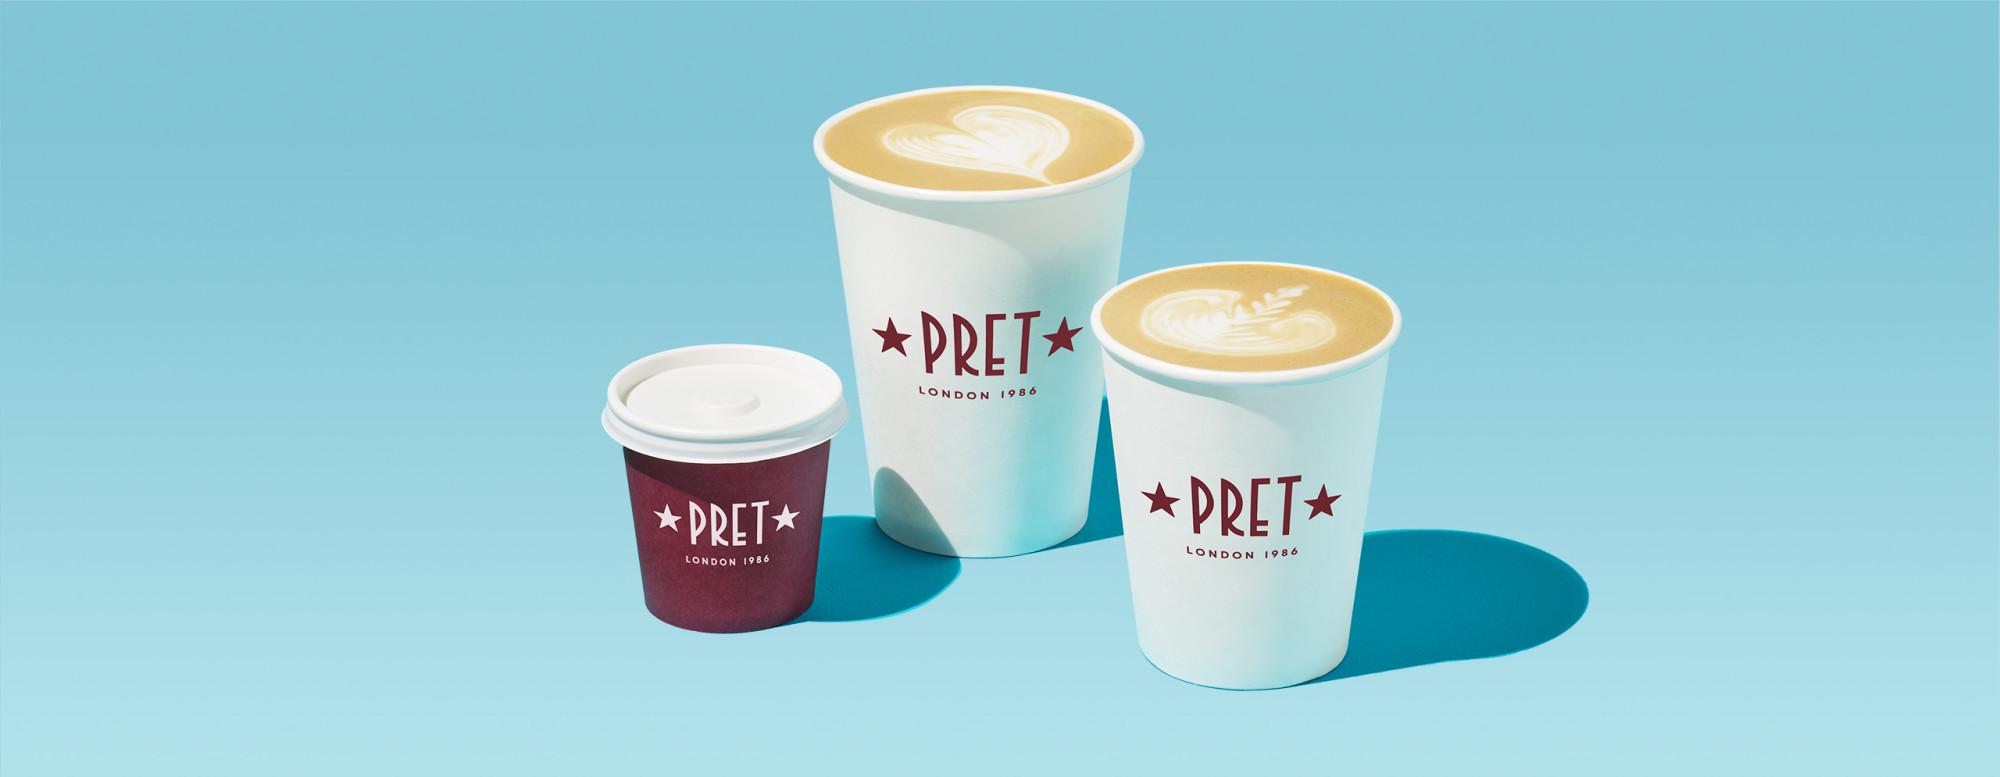 Say hello to your new Pret Coffee Subscription